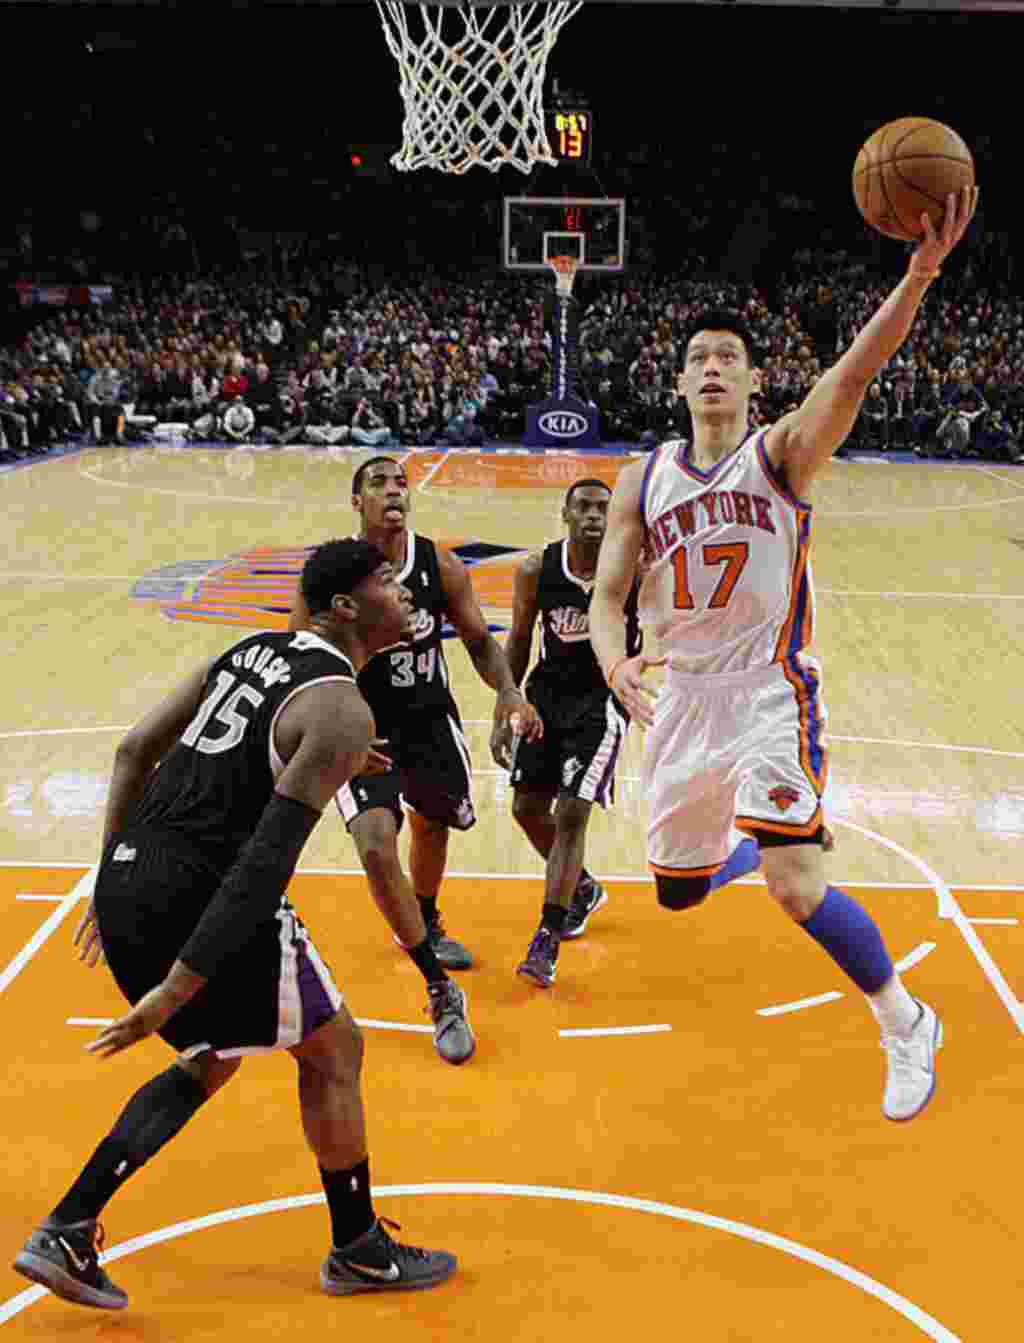 New York Knicks' Jeremy Lin drives past Sacramento Kings' DeMarcus Cousins during an NBA basketball game on February 15, 2012, in New York. Lin had 10 points and 13 assists as the Knicks won the game 100-85. (AP)